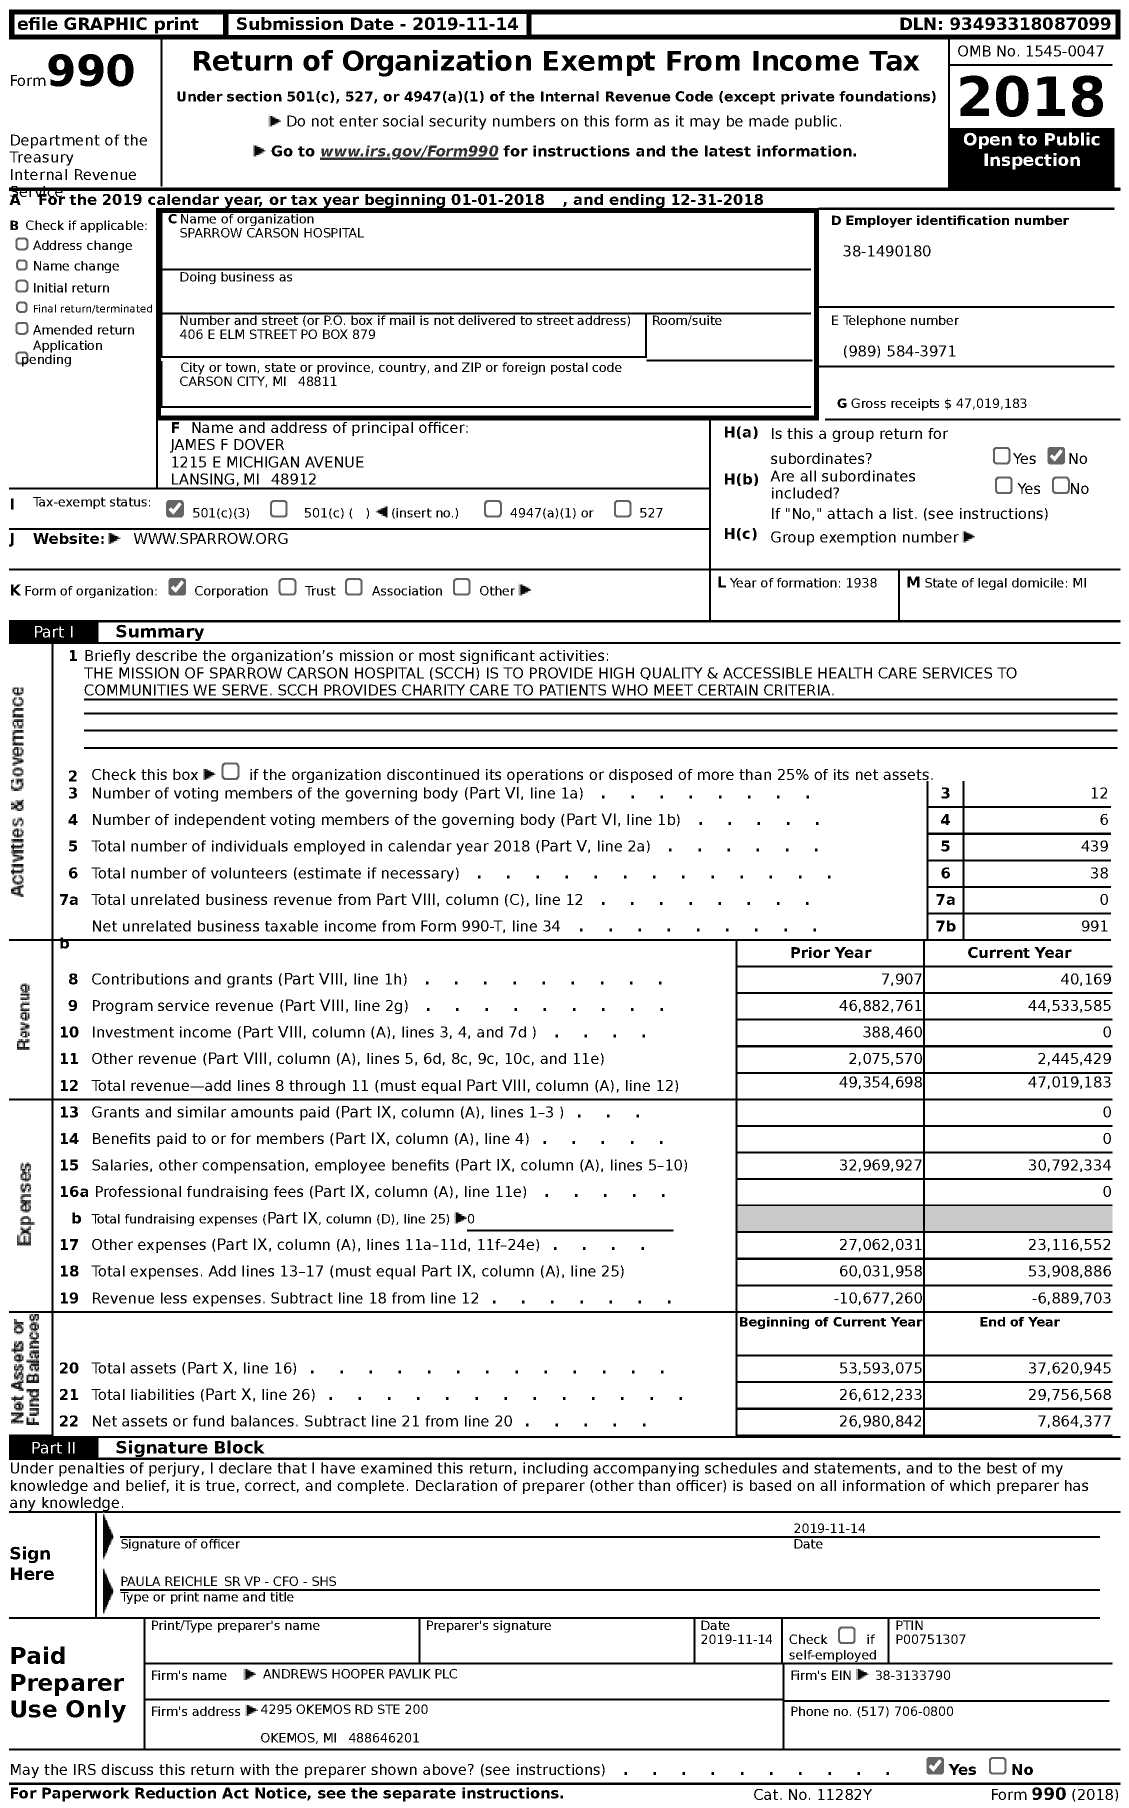 Image of first page of 2018 Form 990 for Sparrow Carson Hospital (SCCH)